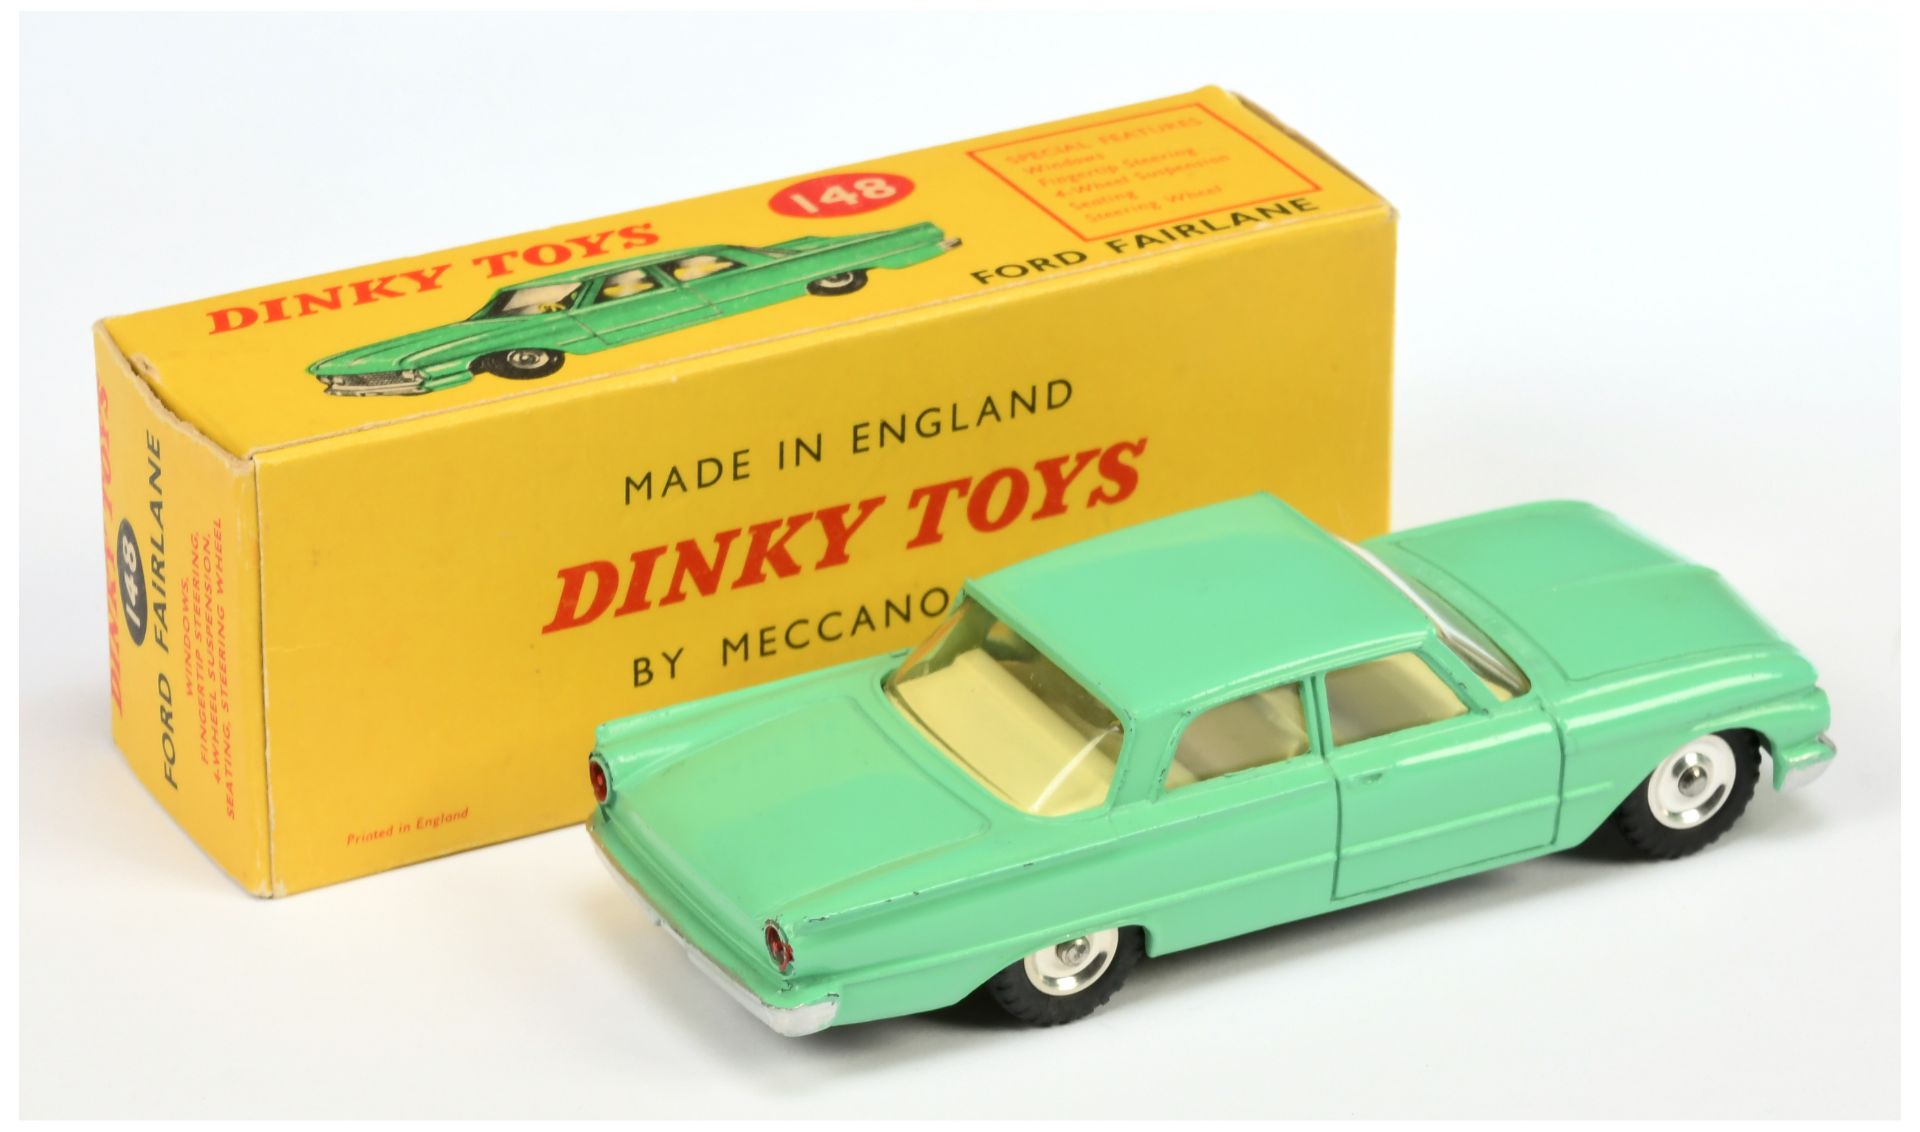 Dinky Toys 148 Ford Fairlane - Pale green, pale cream interior, silver trim and spun hubs  - Image 2 of 2